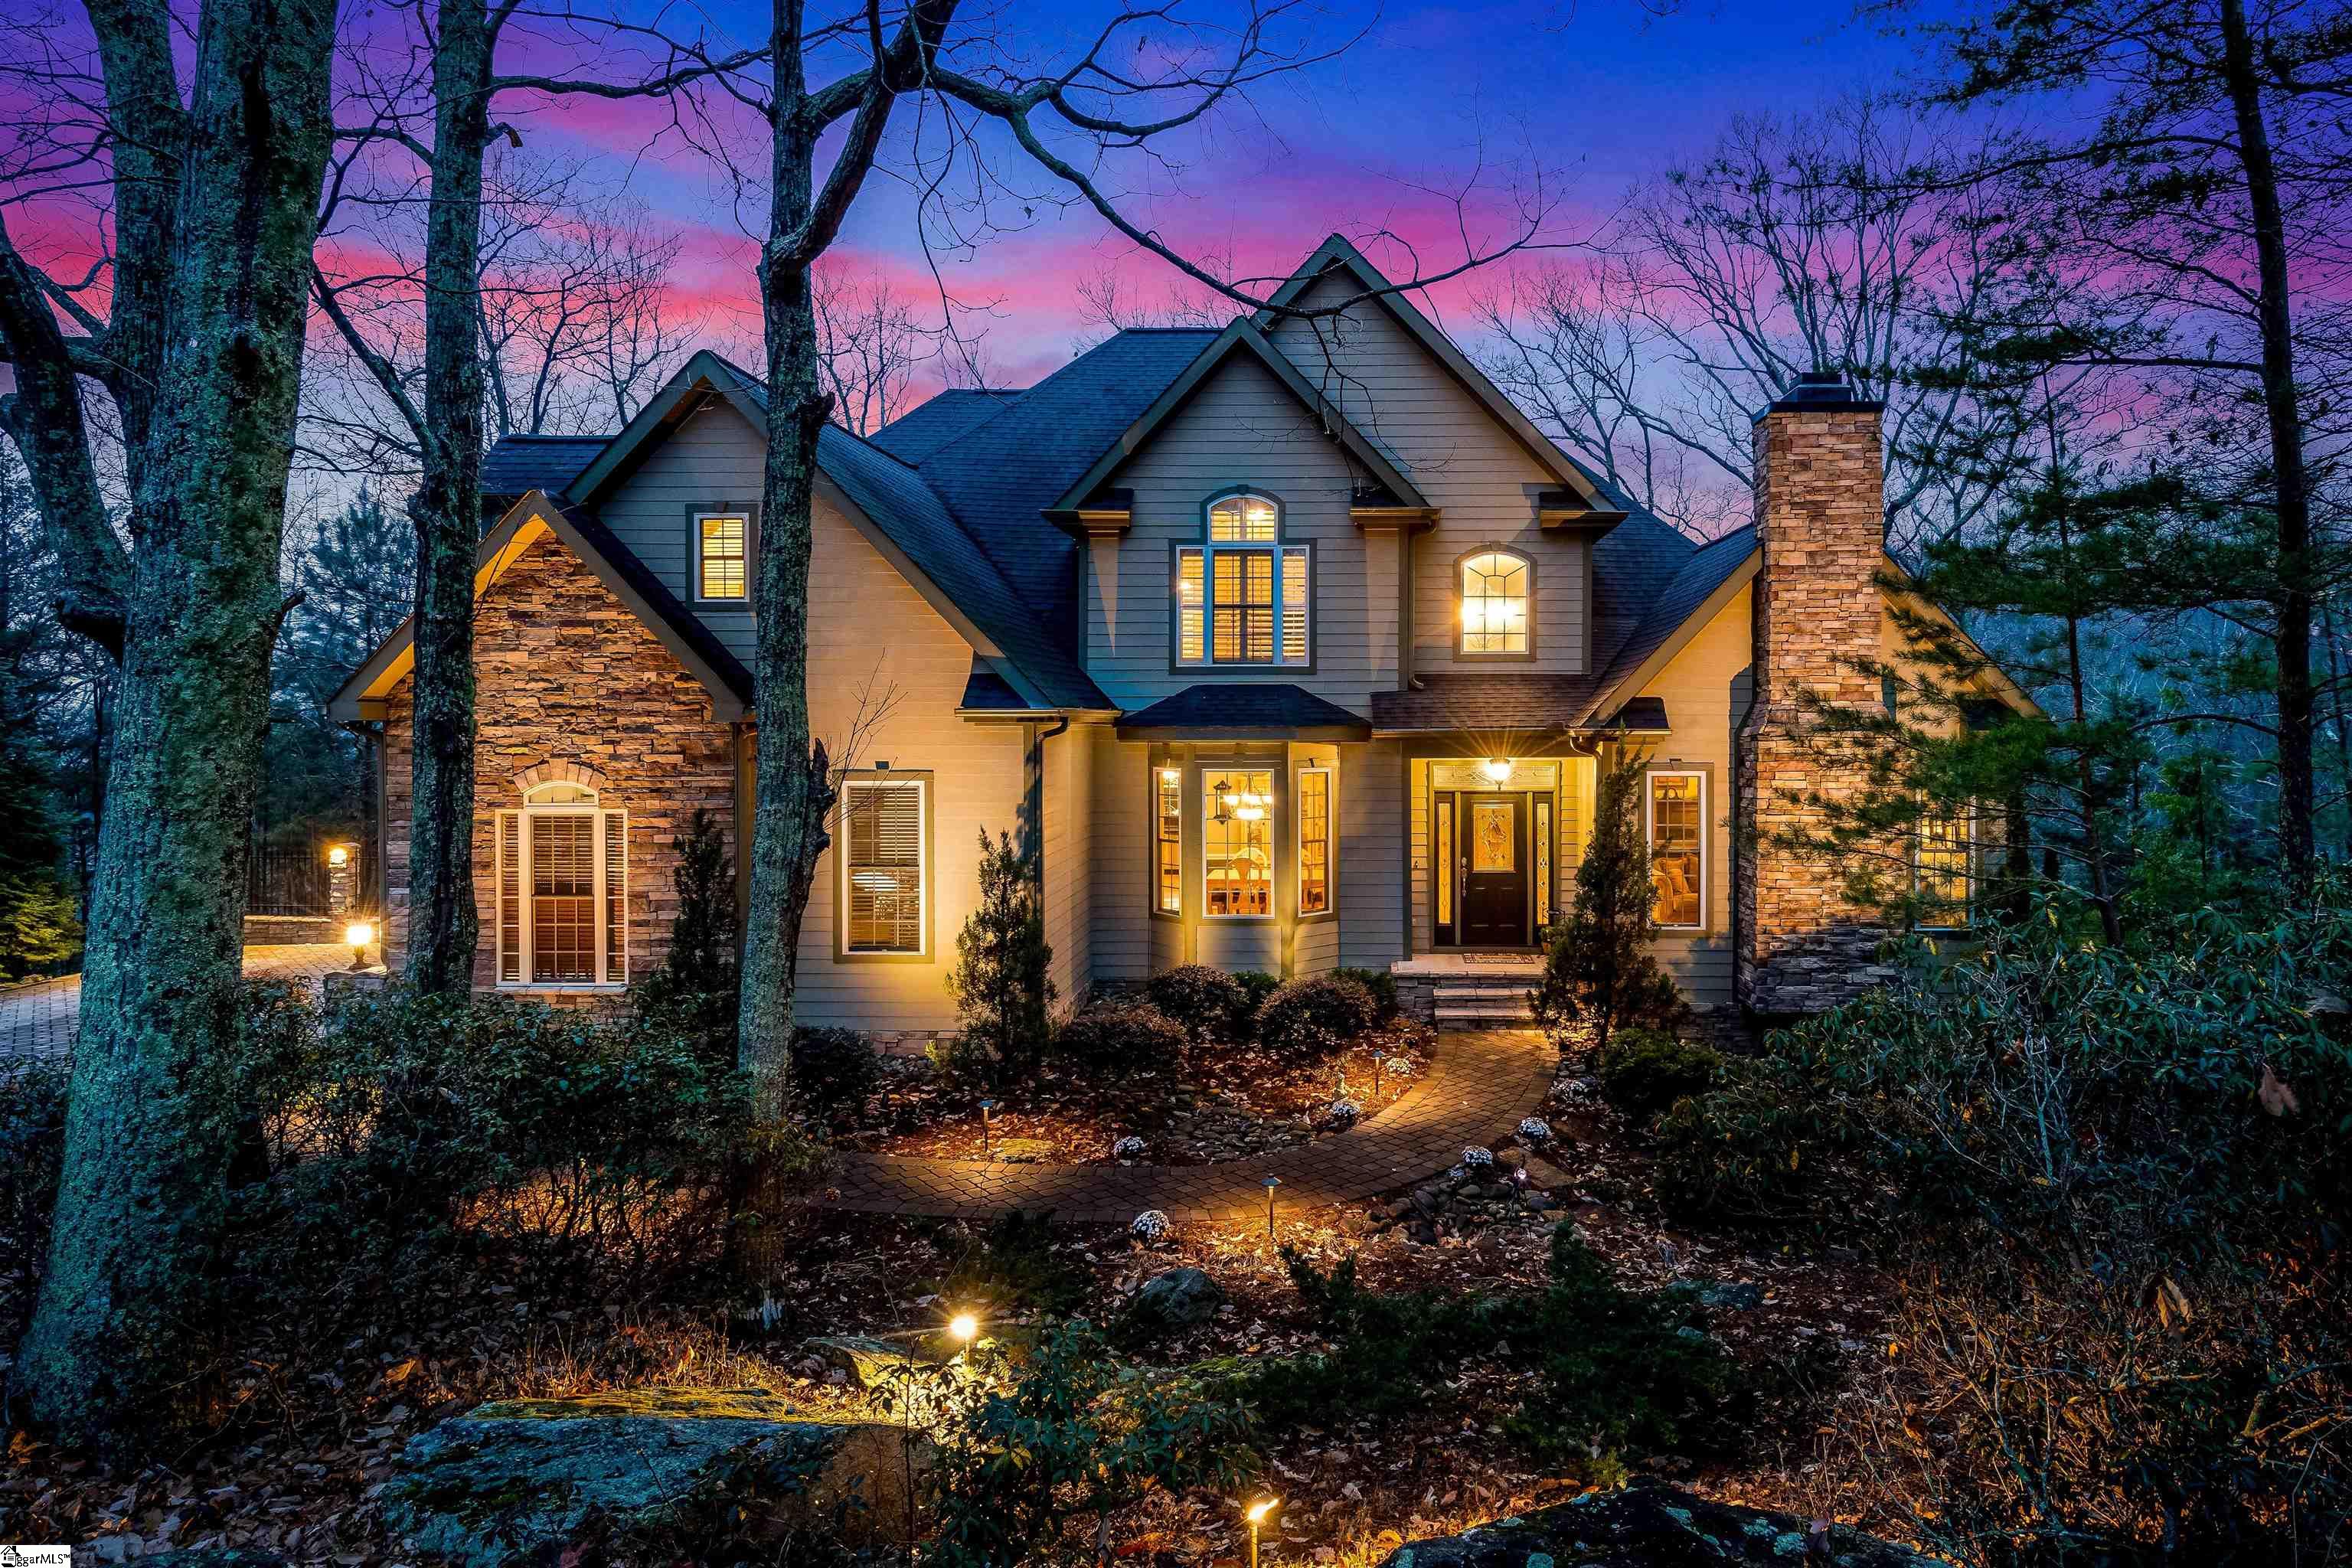 This mountain-top custom-built beauty sits nestled in the prestigious community of The Cliffs at Glassy on 2.51 acres with a creek in the back! Why wait to build when you can have this one and personalize to your own style? This home is 2 stories PLUS a FULL FINISHED BASEMENT that has ability to serve as a full second living quarters. 7 total bedrooms, 4.5 bathrooms, 3 fireplaces, expansive decks, hardwood flooring, open concept living, and wine cellar. On the main floor, you have the Master Suite as well as another secondary bedroom with full bathroom attached. Also on the main floor is a walk-in laundry room, half bath, formal dining room, front room with it's own fireplace that can serve as the perfect flex space for a home office, formal sitting room, or library. There is also the main living room with another fireplace, breakfast room, and kitchen. Off the kitchen is the top deck which gives you partial mountain views in the winter months, and a secluded oasis in the summer. Upstairs you have 3 oversized bedrooms, one full bath with dual vanities, and a large loft area. One of the bedrooms upstairs is large enough to serve as a bunk room, playroom, or bonus/rec/hobby room. There are spacious closets as well as walk in attic spaces off the largest bedroom and the loft area. In the basement you have a second full kitchen, living room with another fireplace, pantry, full bath, rec room, heated/cooled large storage room, wine cellar, 2 large bedrooms with big closets, and even under stairs storage. The basement also has access to a second back deck. This is the perfect space to entertain for big family holidays, allow the in-laws or teens to have their own space, or watch the big games in style! The curb appeal on this home is absolute perfection and the home has been meticulously maintained. Enjoy beautiful landscape/up lighting, paver patio, aluminum fencing at the back of driveway, and a side entry garage. *Furniture in the home is negotiable on a separate bill of sale.* This makes it for the perfect move in-ready and furnished home! Enjoy all the luxuries of The Cliffs; golf, tennis, pool, and the infamous Glassy Chapel. It is truly breathtaking so make sure to pop up there to the chapel after your showing (as long as no events are going on) and have the camera ready! Schedule your showing today before this one slips away!